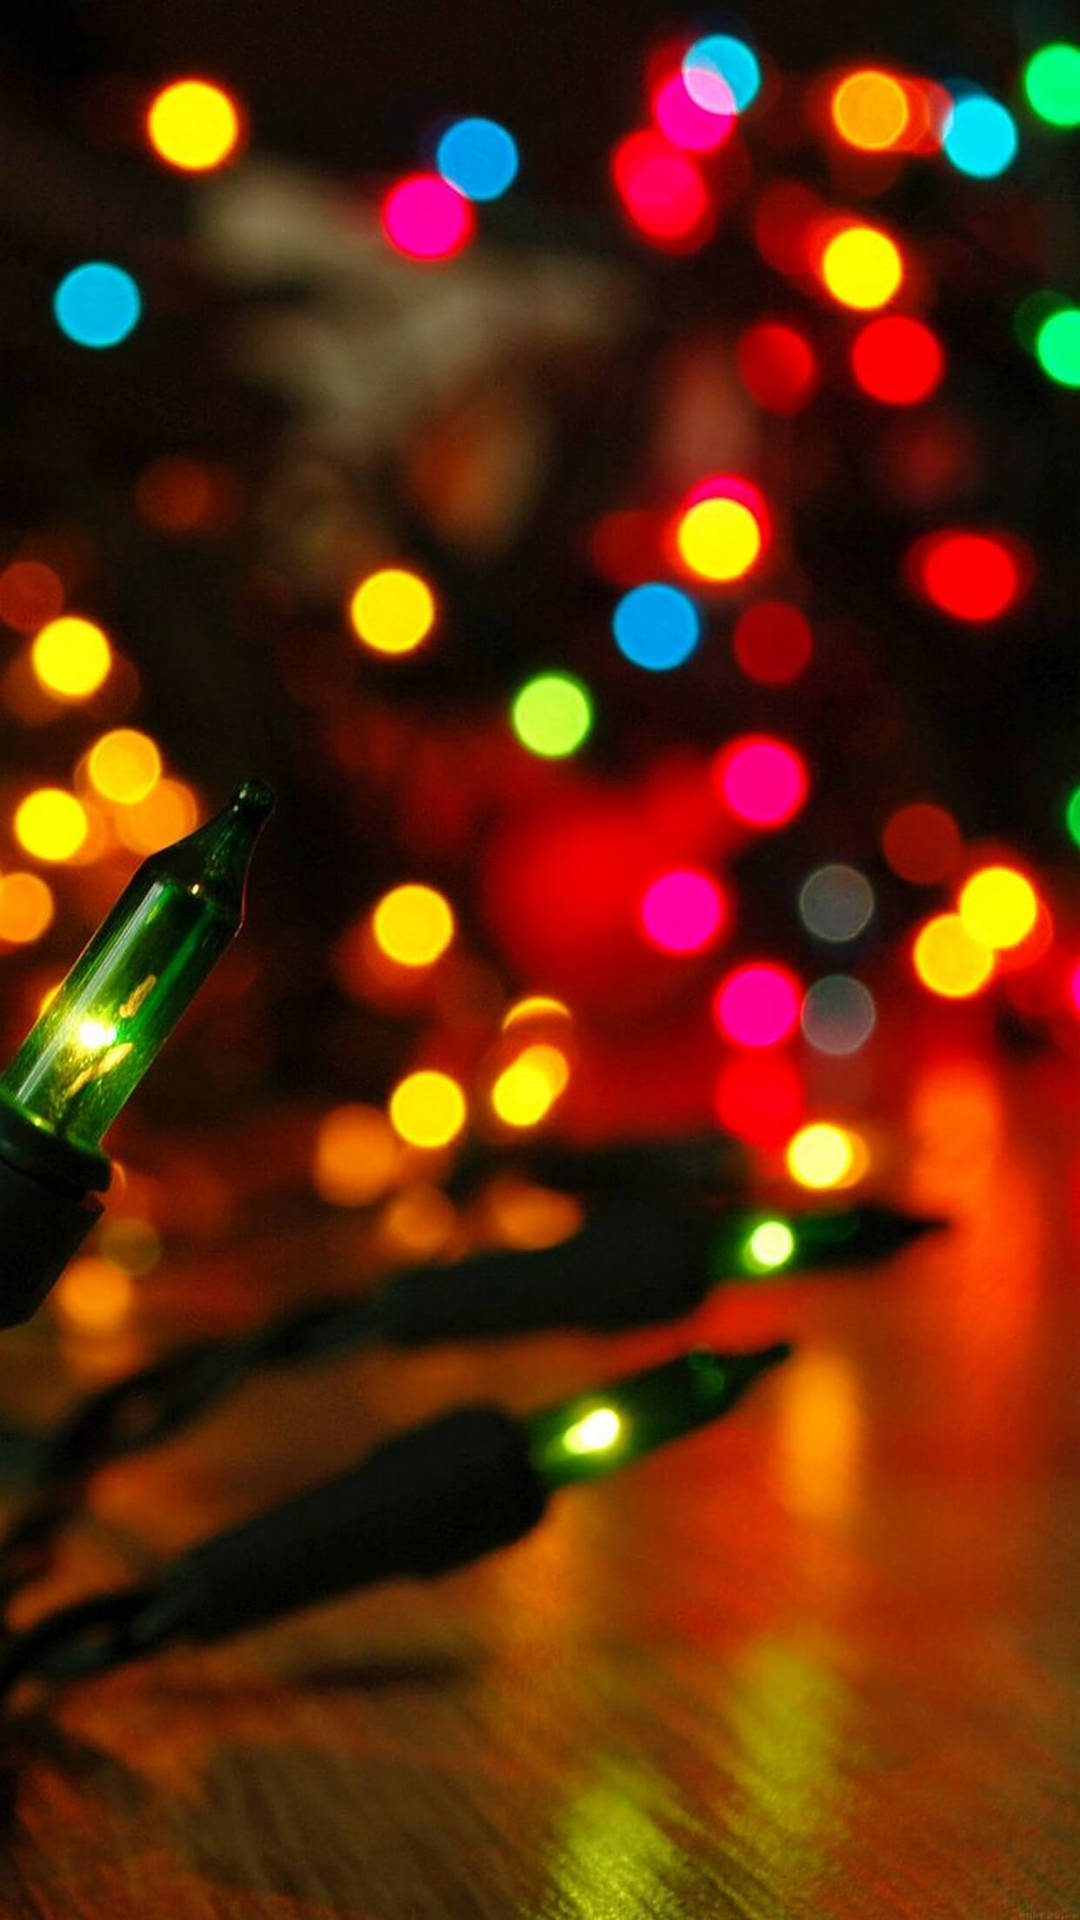 "Look how beautiful Christmas lights can make your home!" Wallpaper